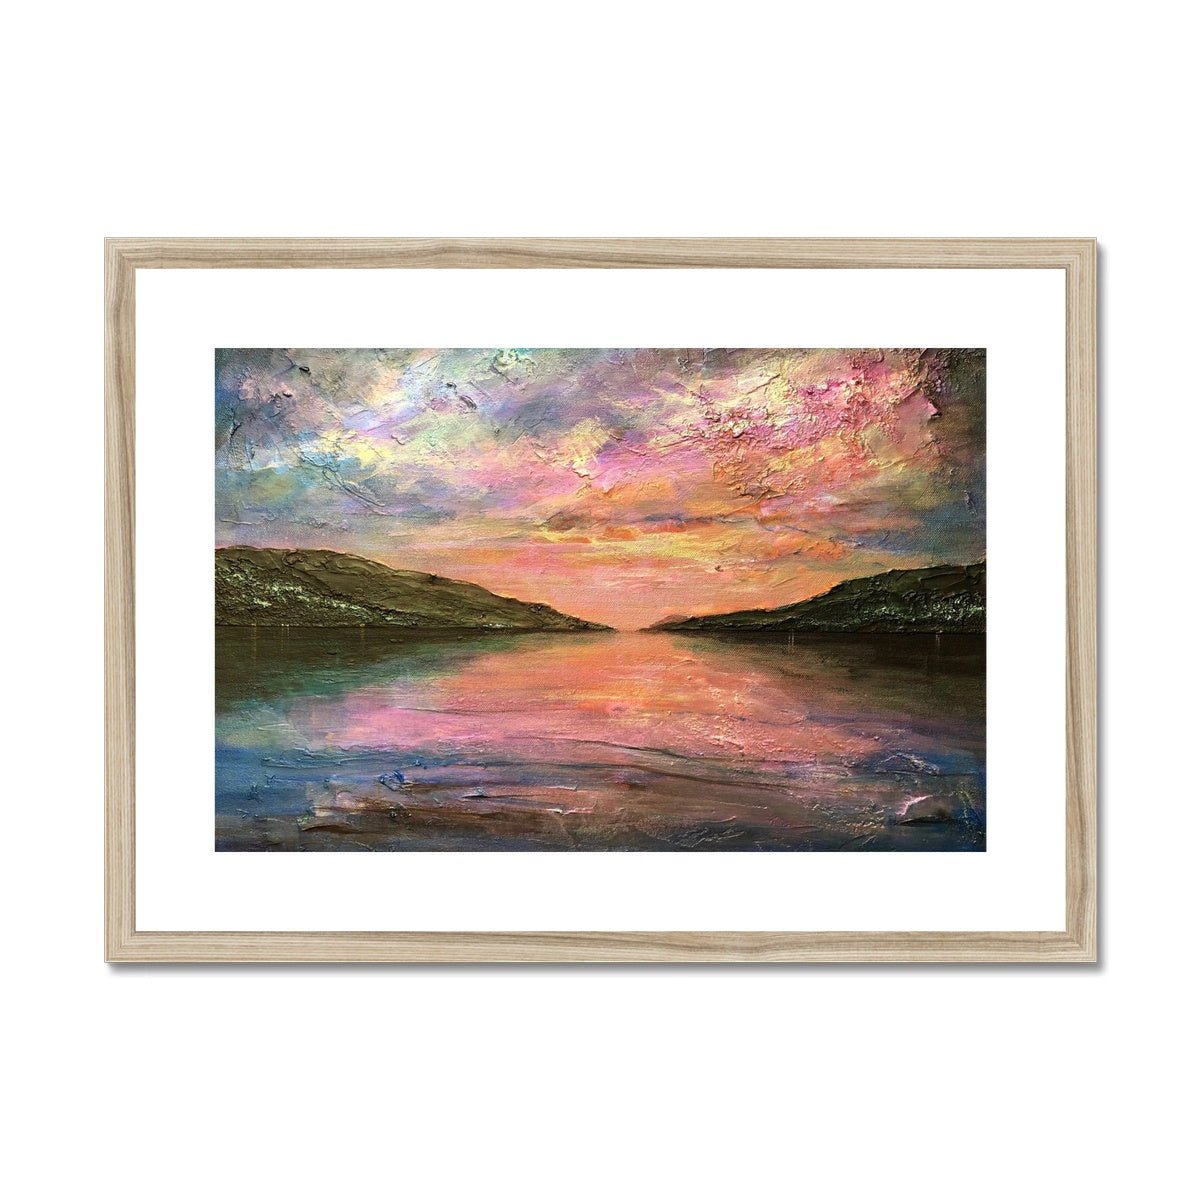 Loch Ness Dawn Painting | Framed & Mounted Prints From Scotland-Framed & Mounted Prints-Scottish Lochs & Mountains Art Gallery-A2 Landscape-Natural Frame-Paintings, Prints, Homeware, Art Gifts From Scotland By Scottish Artist Kevin Hunter